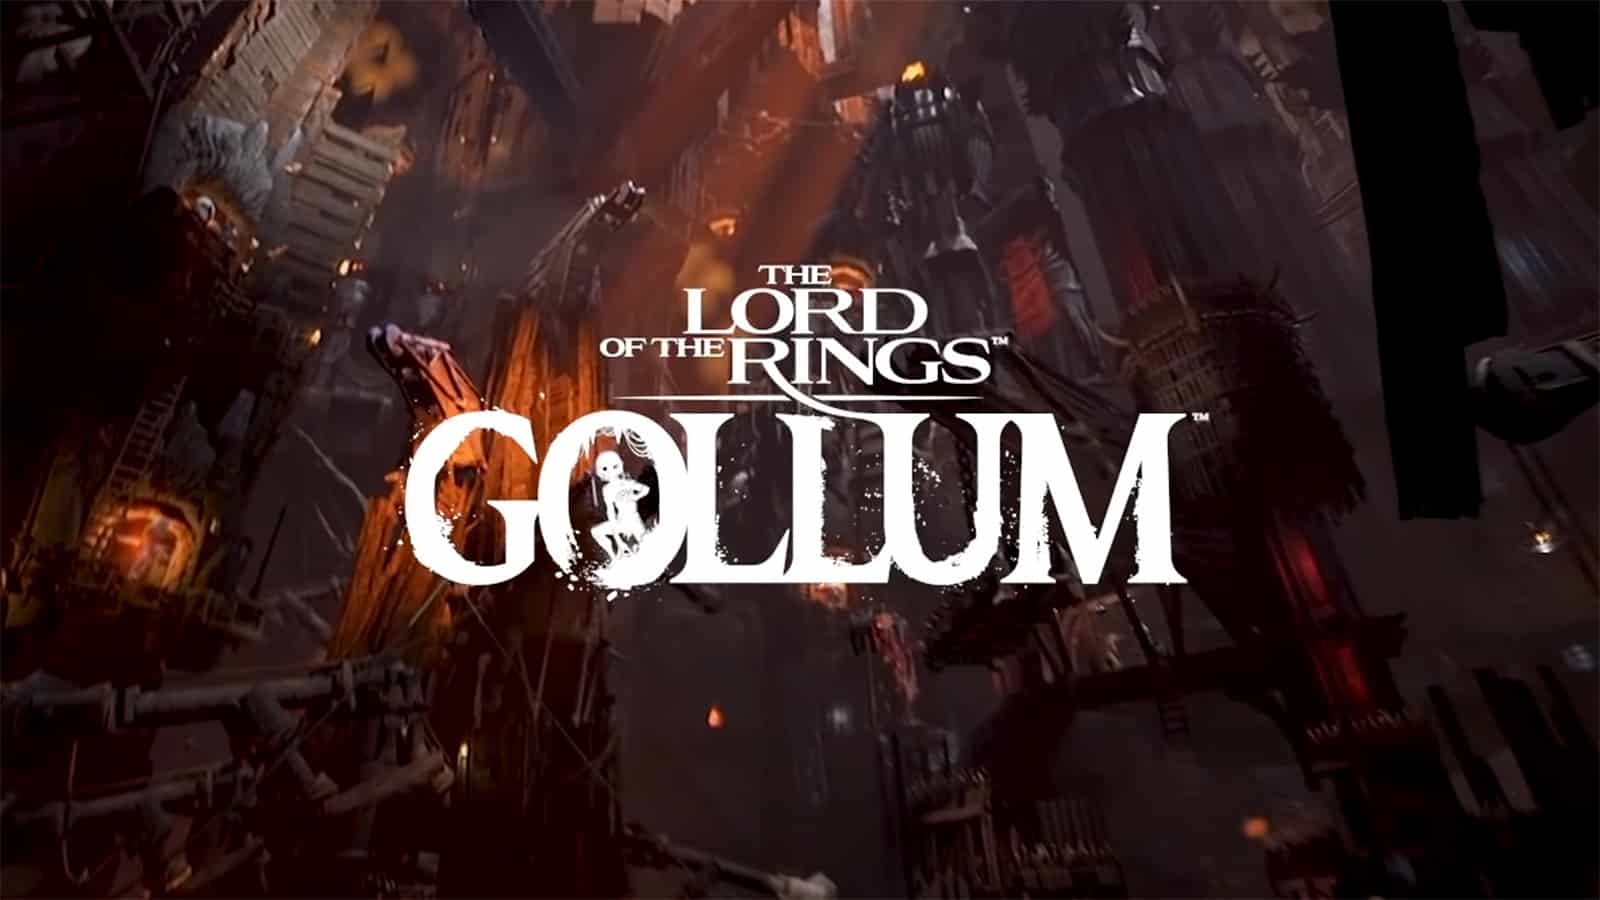 How long is The Lord of the Rings: Gollum?